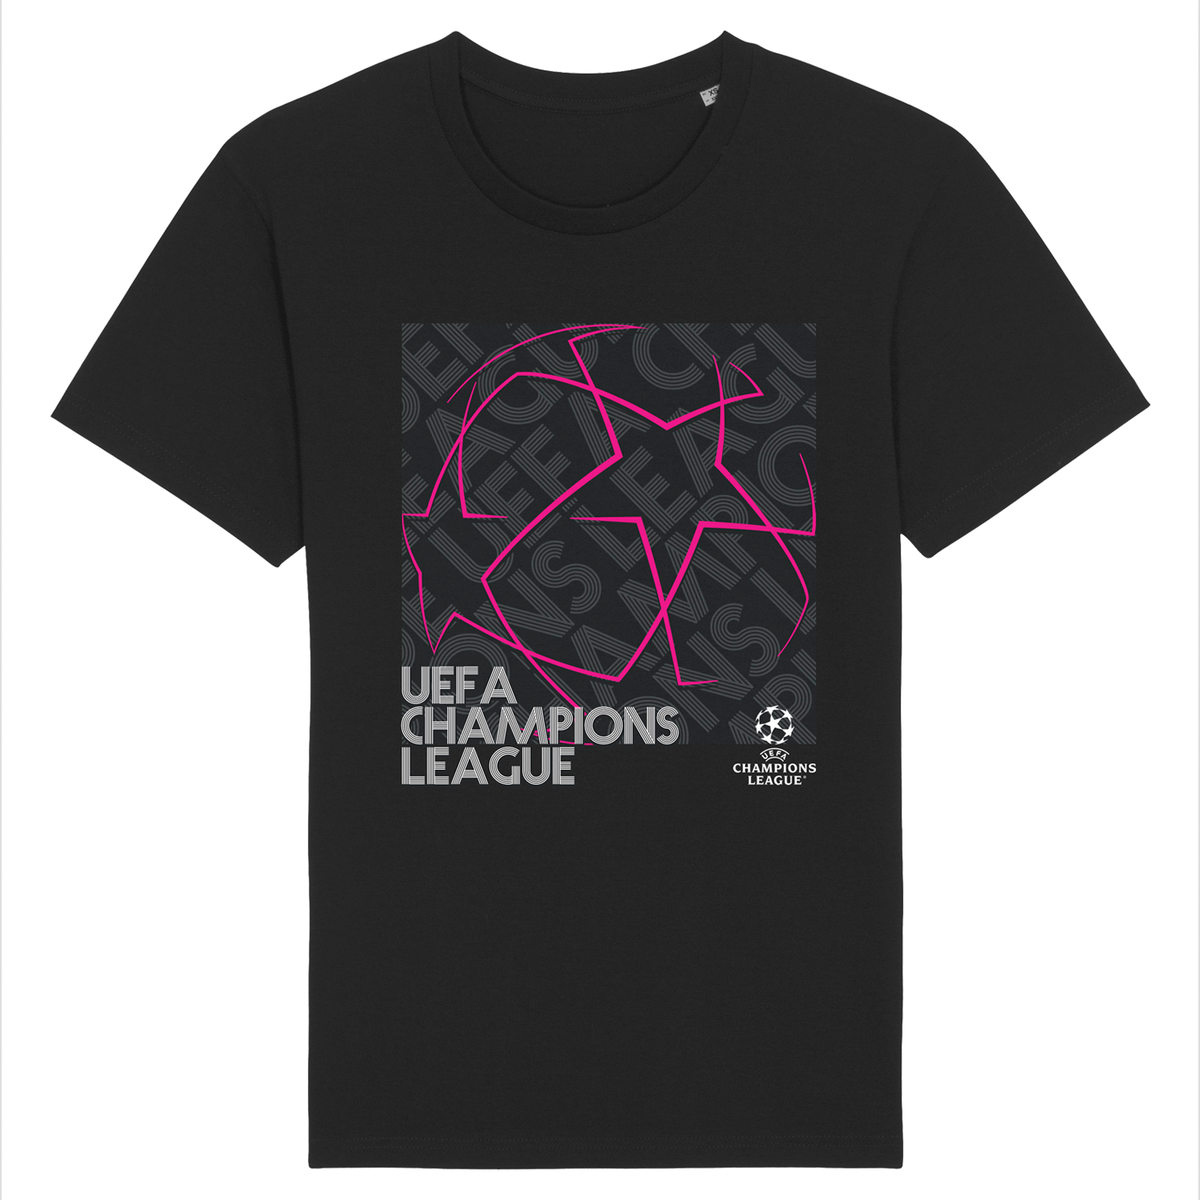 UEFA Champions League - Urban Starball Black T-Shirt UEFA Club Competitions Online Store